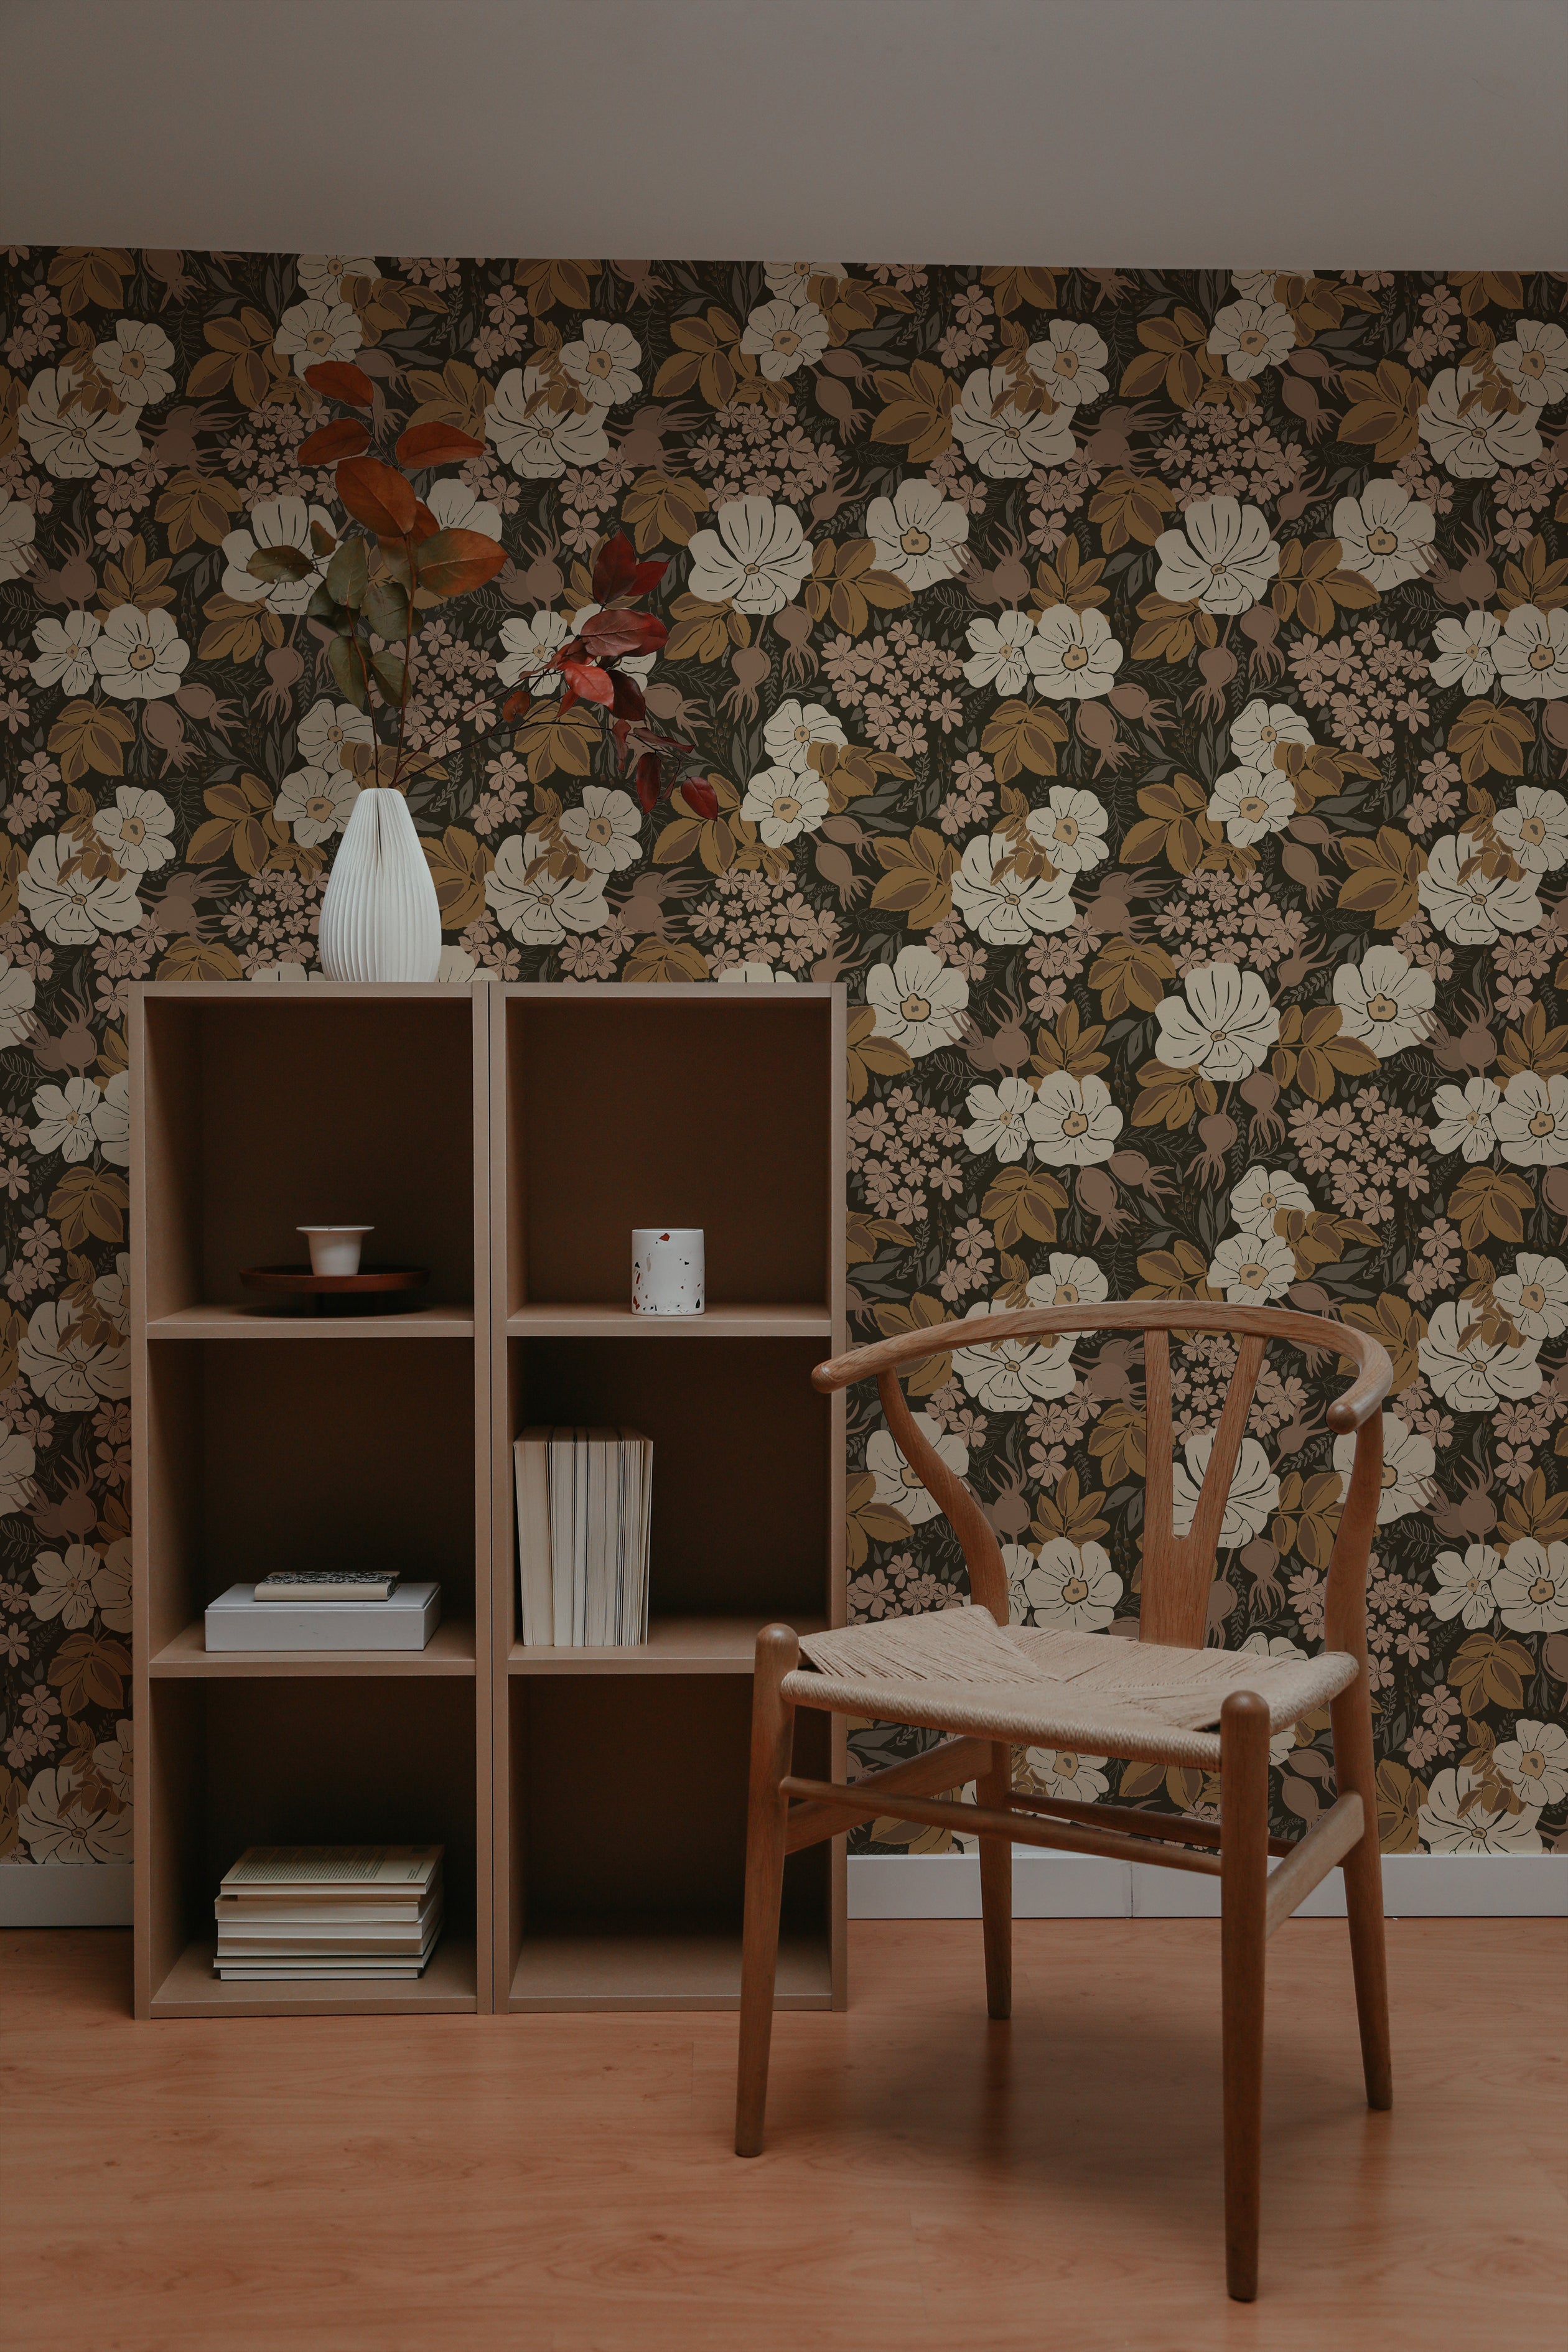 A stylish study corner with a wooden chair and a simple desk under a modern lamp. The Rosehip Wallpaper in the background features large white flowers and dense foliage, creating a serene and inspiring workspace.